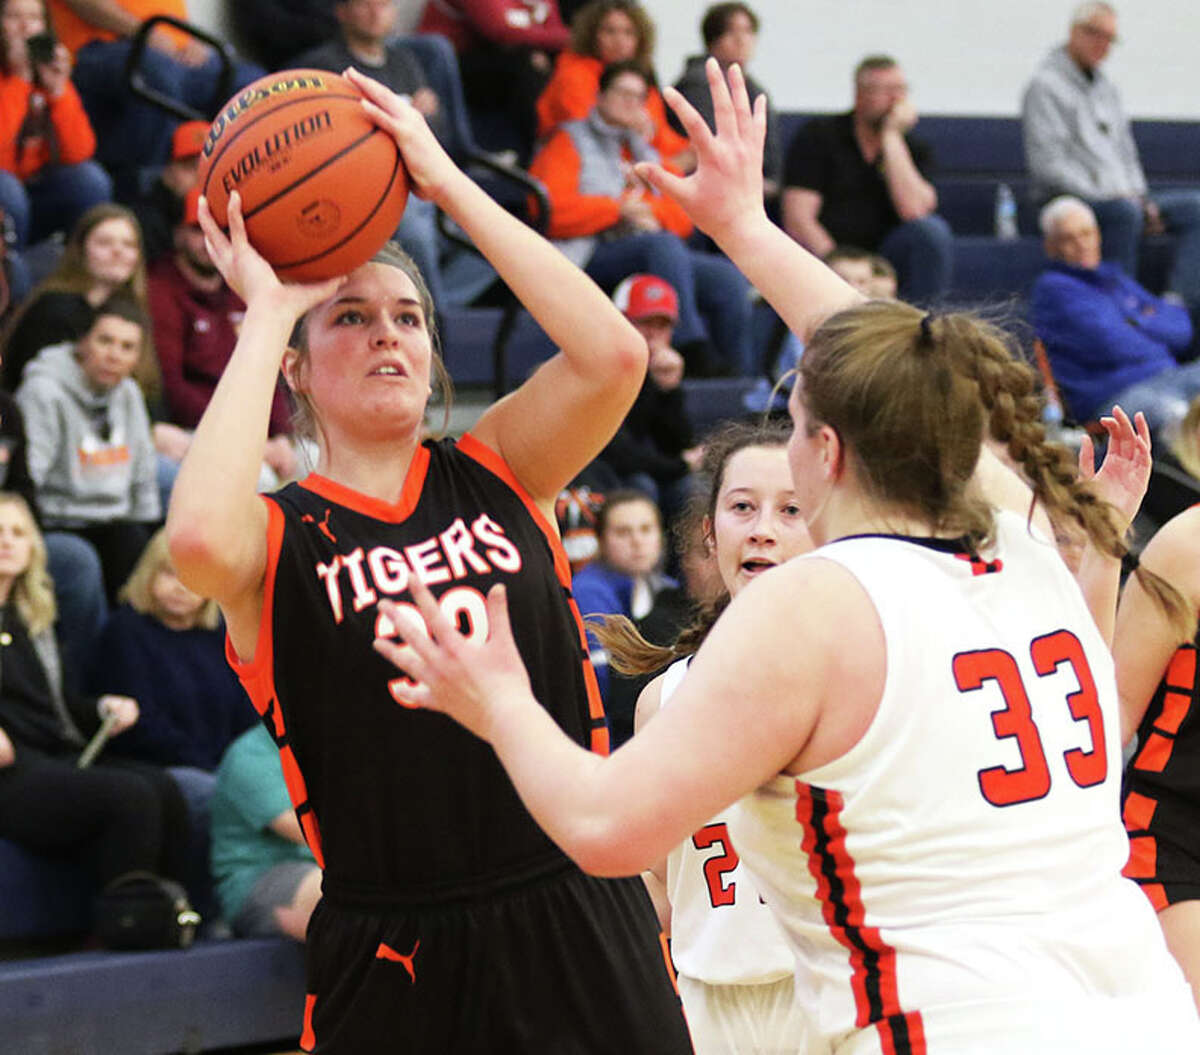 Greenfield's Kylie Kinser (left) shoots in a game at January's North Greene Tourney in White Hall. Kinser, a senior, and her Tigers teammates will be at home this week for the Greenfield Class 1A Regional.